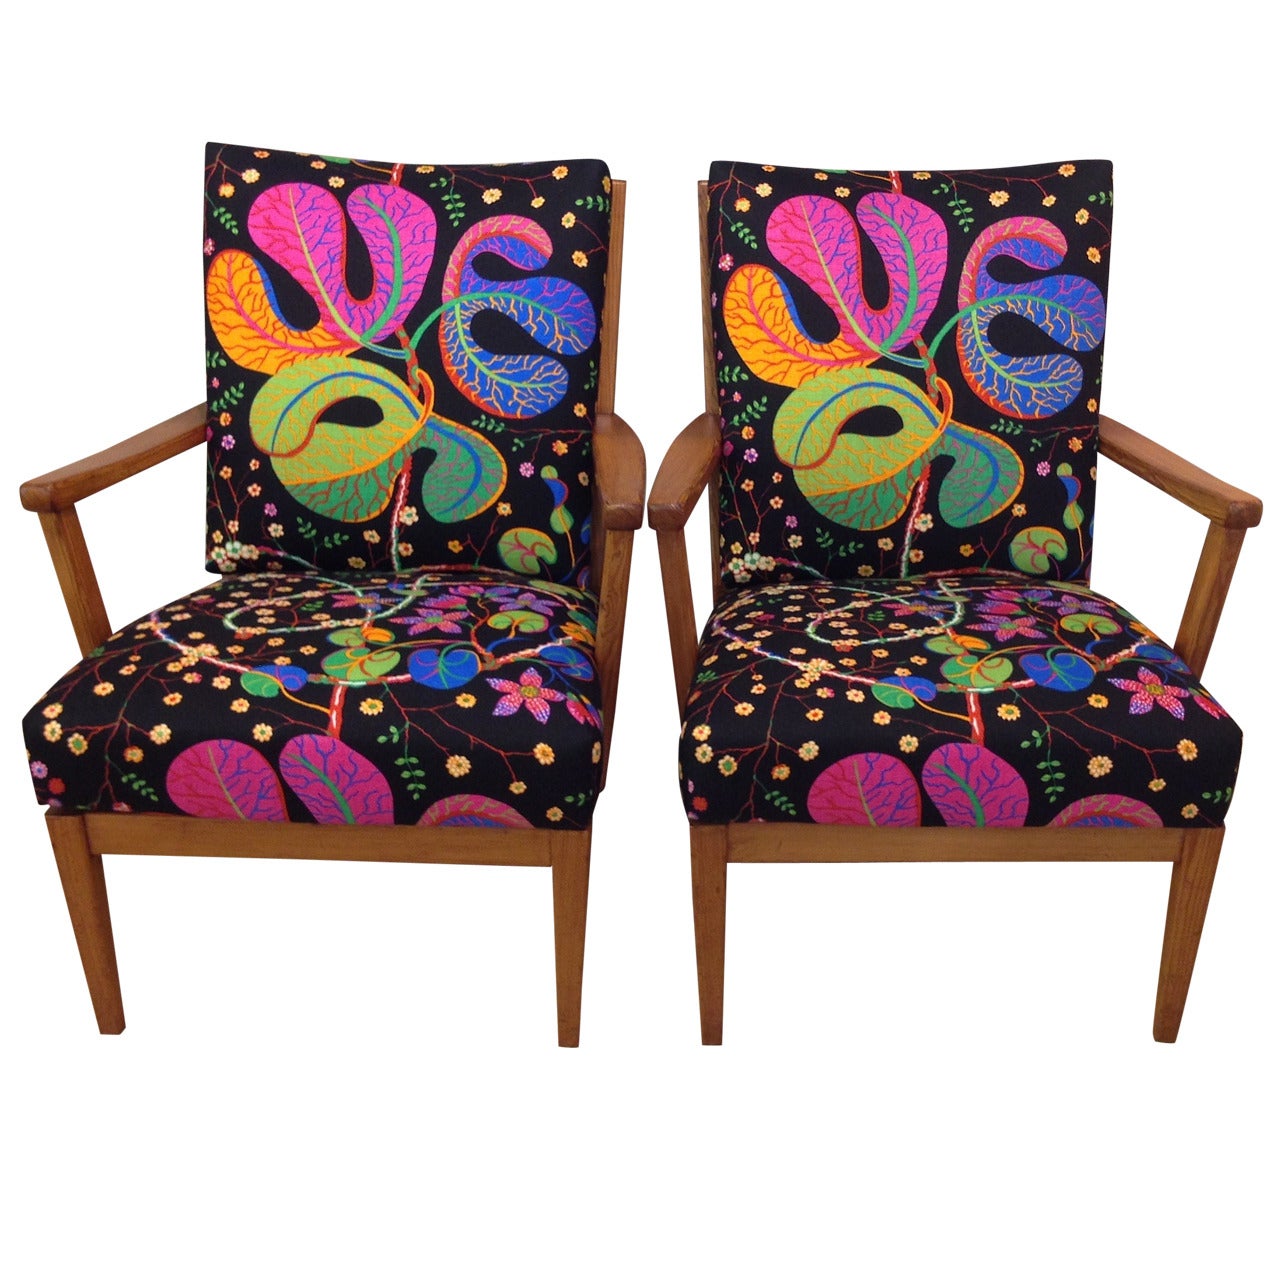 Carl Malmsten "Stugan" Cottage Armchairs with Josef Frank Fabric, Sweden, 1950s